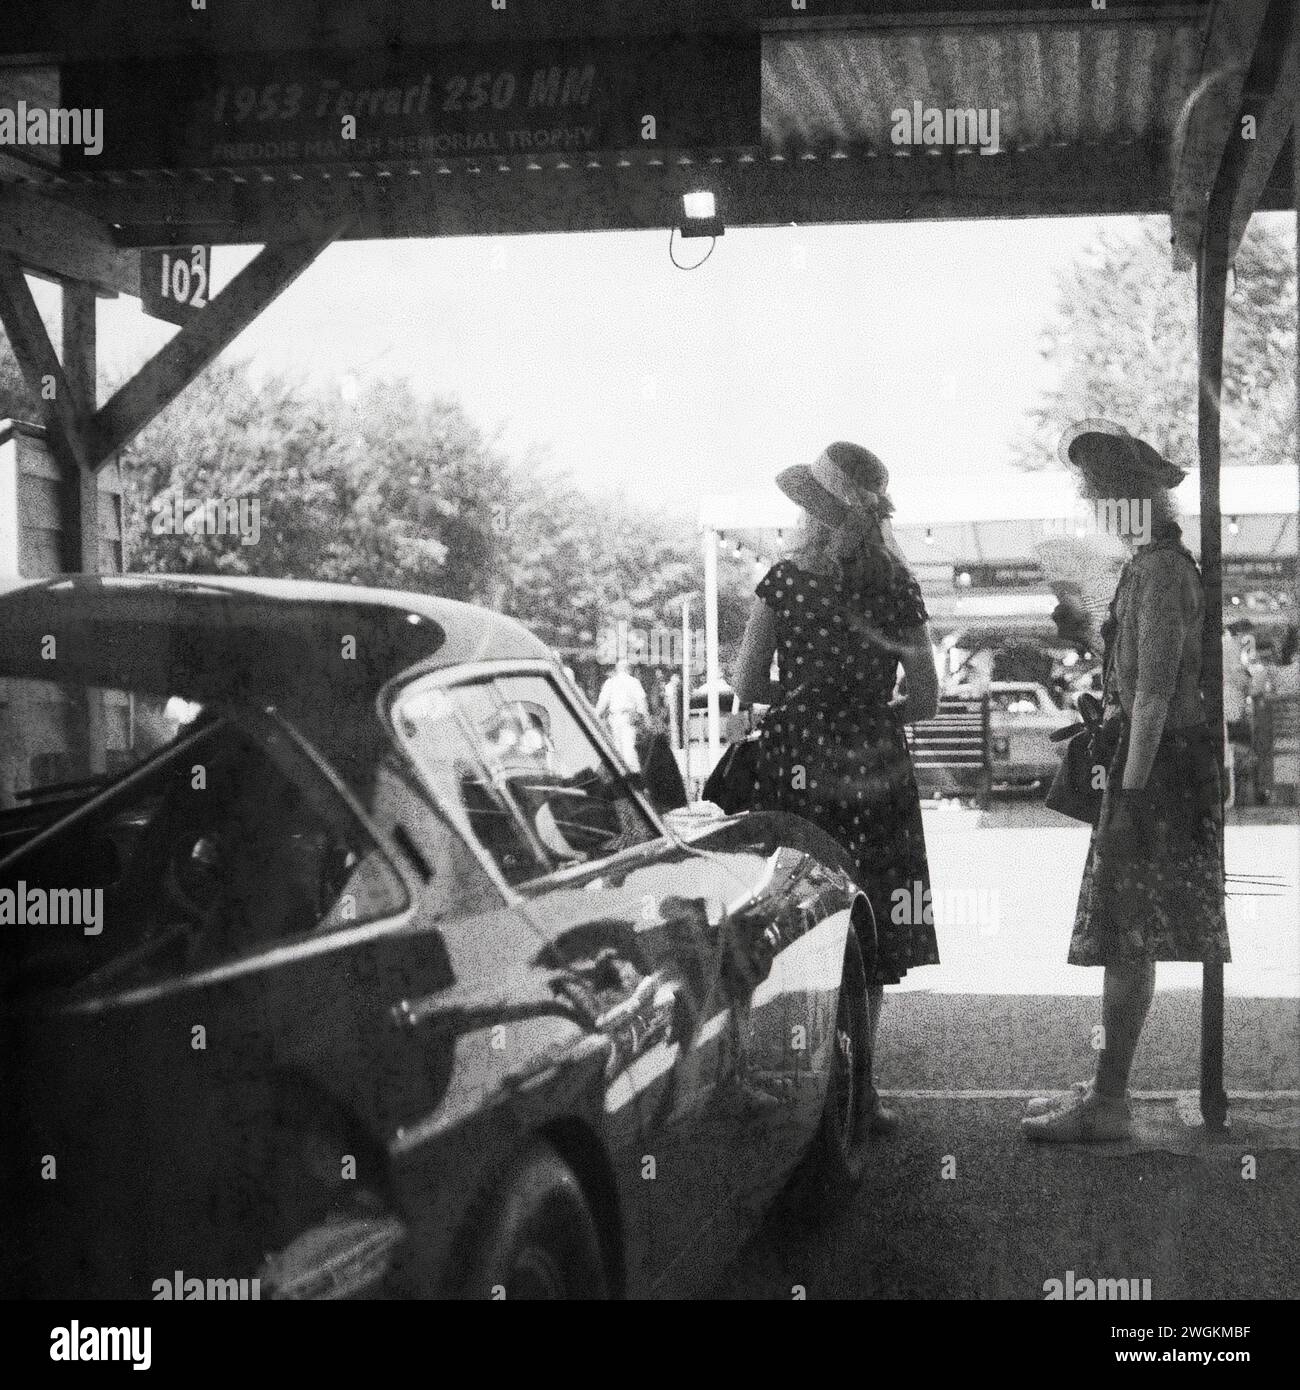 Goodwood Revival 2023 - images taken on a old Rolleiflex on Kodak film which expired in 1985. Stock Photo